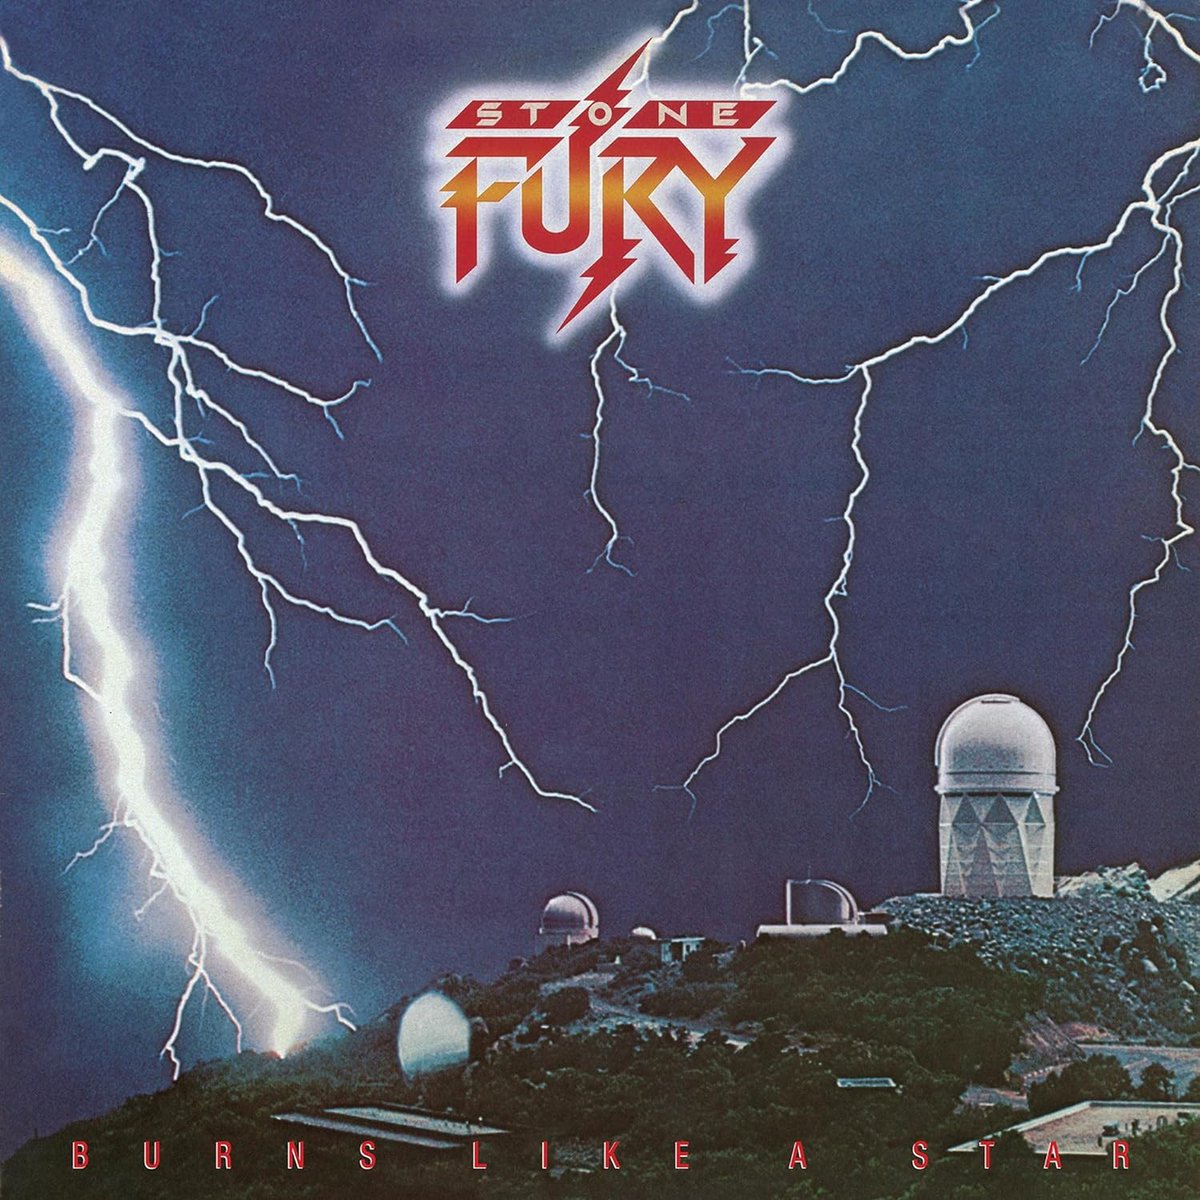 Staying in 1984.
The 157th #album listened to from 1st to final track of 2024 is the debut 'Burns Like A Star' by #StoneFury.
#melodicRock at its best!
My Standouts:
I Hate To Sleep Alone
Mamas Love
Tease 
#80s #80smusic #HardRock #glammetal @BrucebGowdy #RockSolidAlbumADay2024